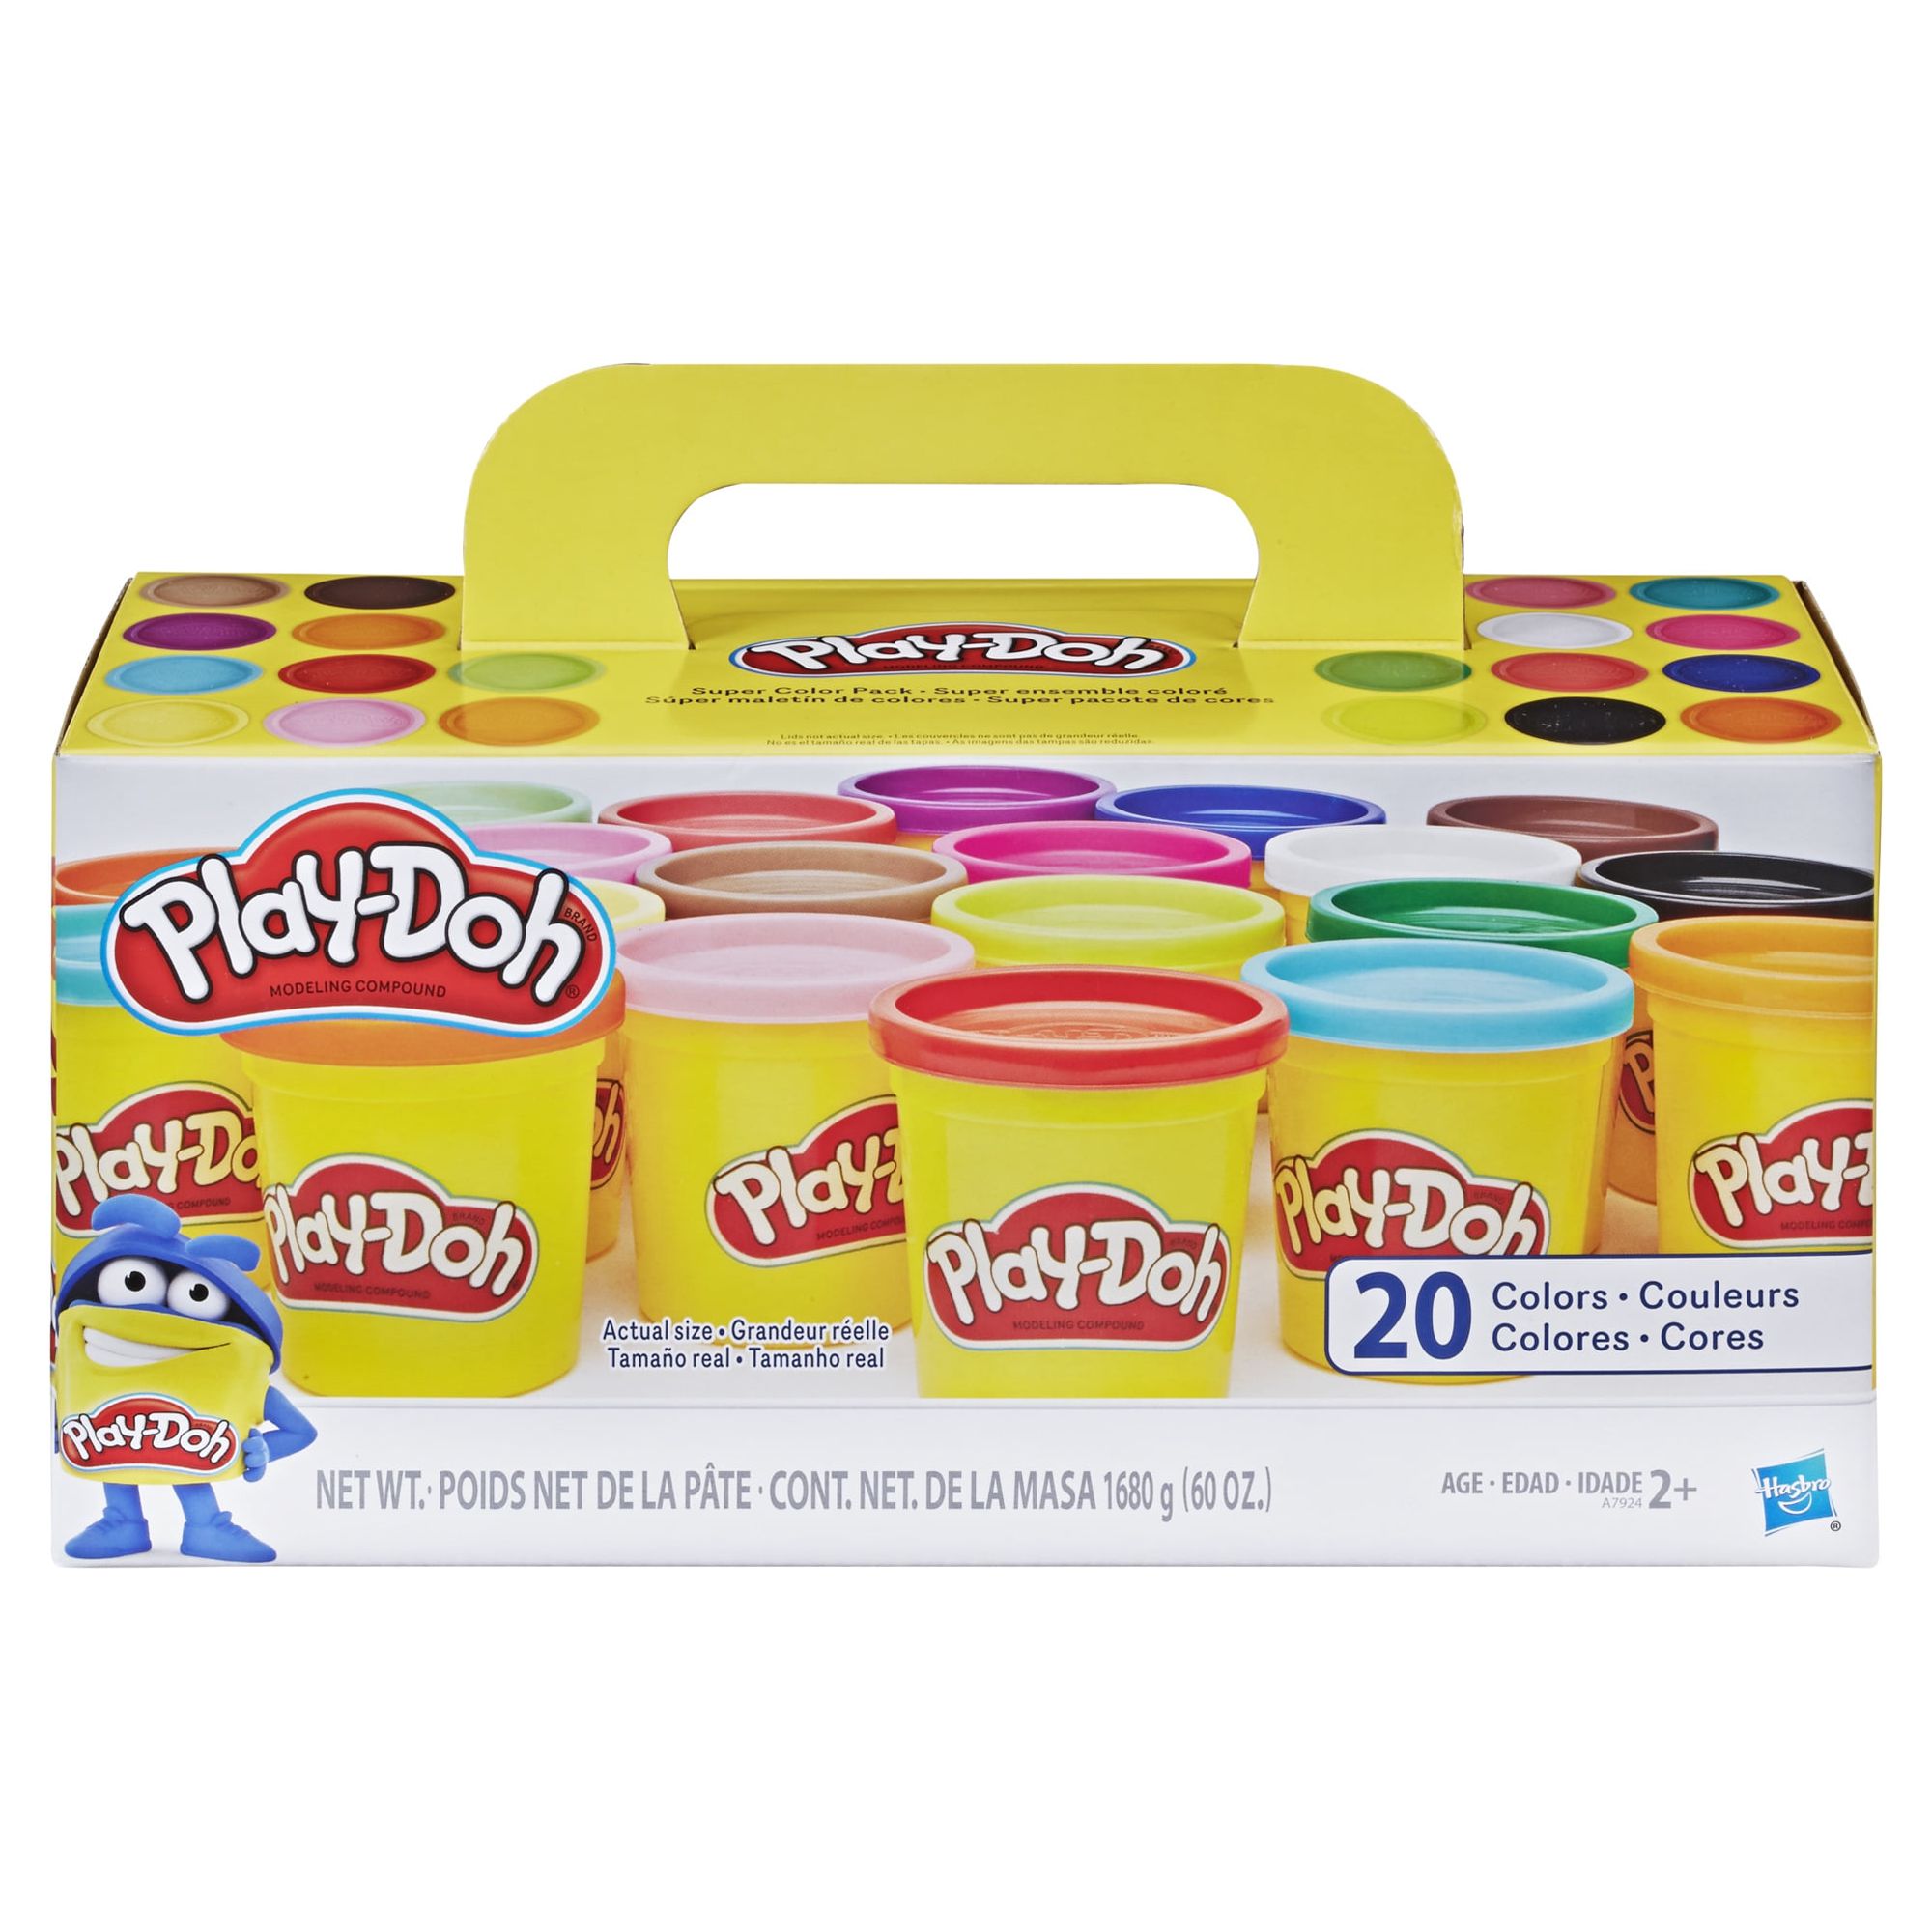 Play-Doh Super Color 20-Pack of 3-Ounce Cans, Kids Toys, Easter Basket Stuffers, Egg Fillers - image 1 of 4